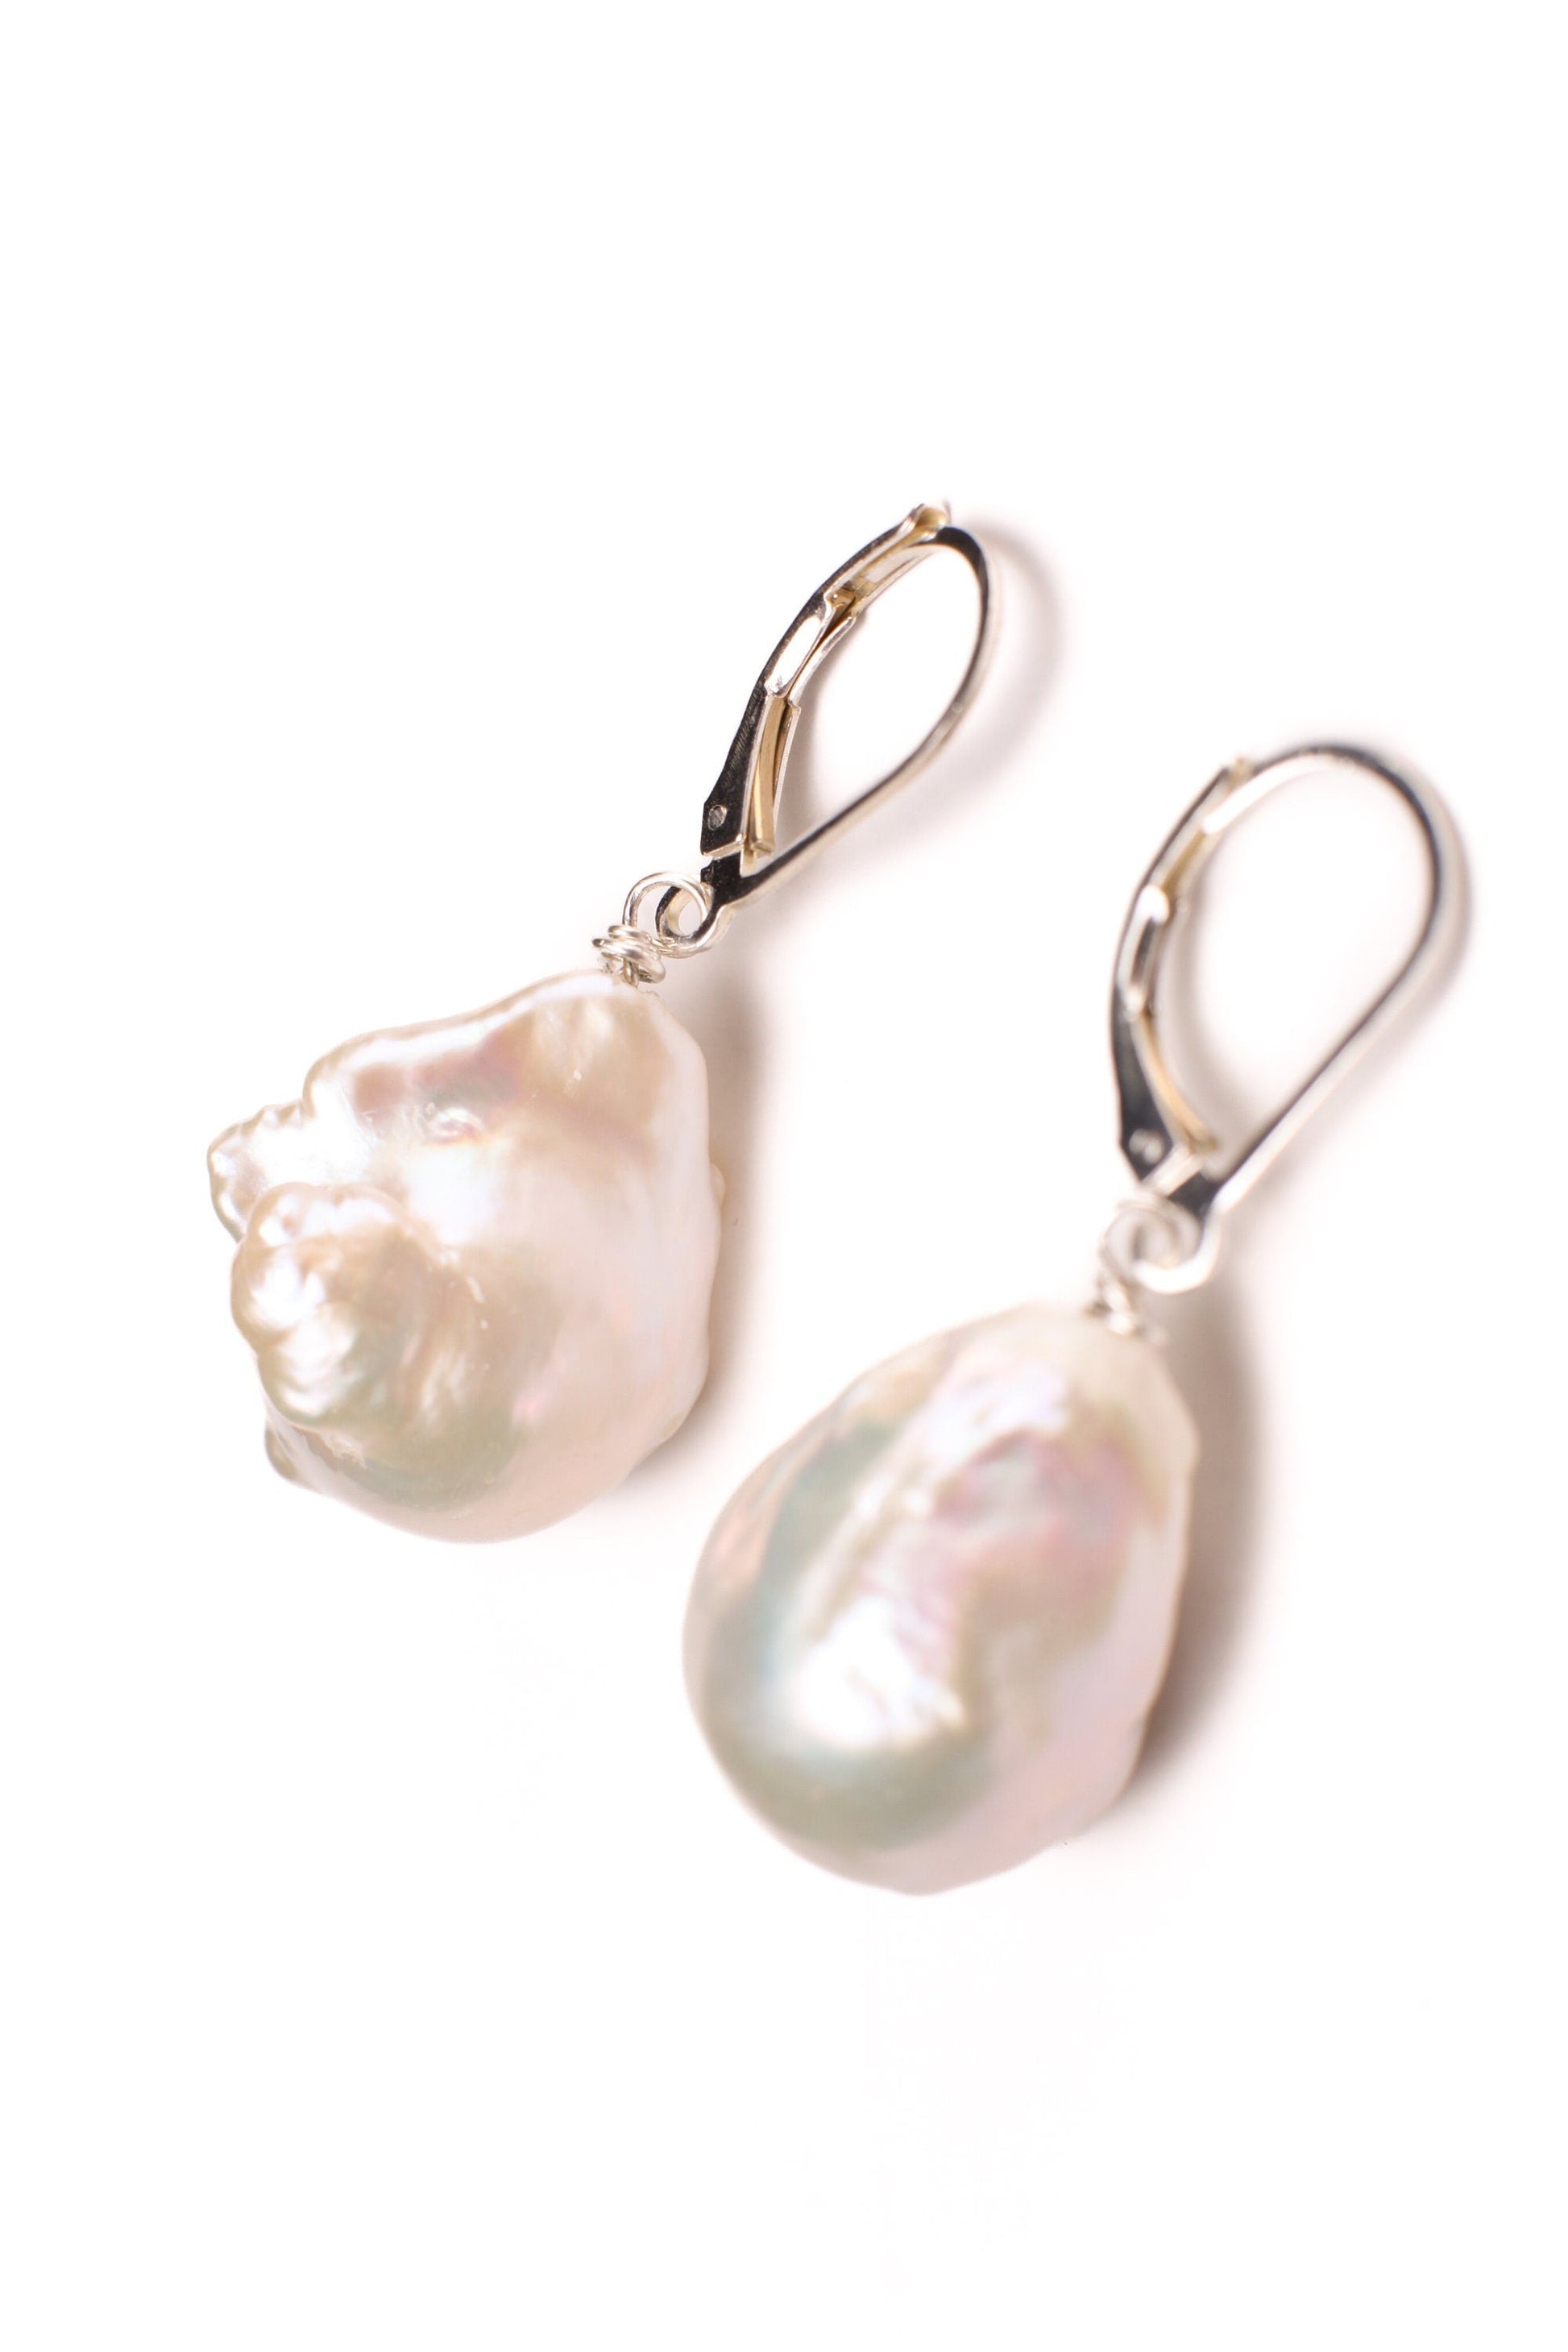 Natural Freshwater Baroque Pearl Flame Ball Earring in 925 Sterling Silver or 14k Gold Filled Leverback Earwire, Elegant Gift